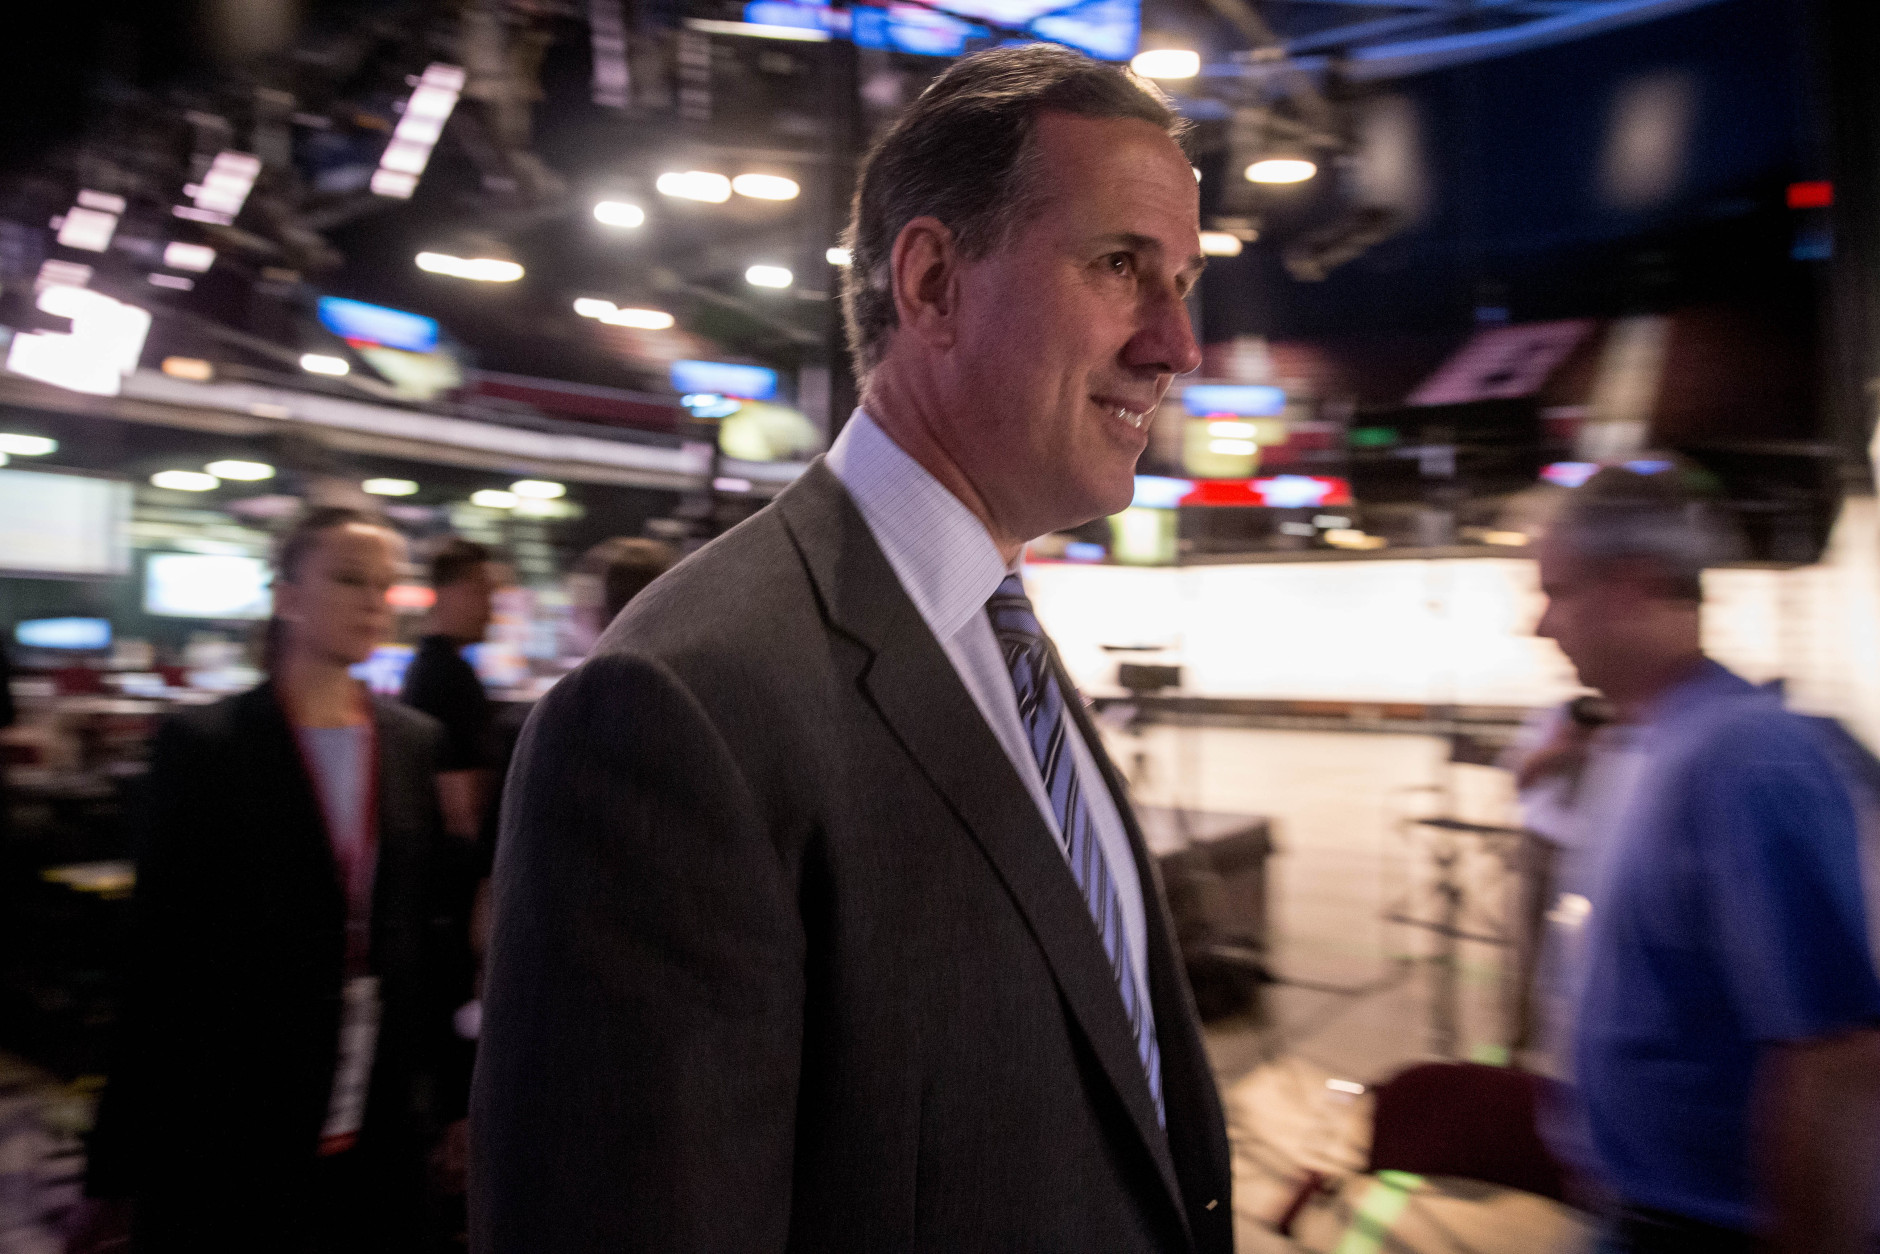 Republican presidential candidate, former Pennsylvania Sen. Rick Santorum walks into the the Quicken Loans Arena in Cleveland, Thursday, Aug. 6, 2015, before tonight's first Republican presidential debate. Santorum has not qualified for the primetime debate and will be participating in a pre-debate forum with six other non-qualifying candidates. (AP Photo/Andrew Harnik)